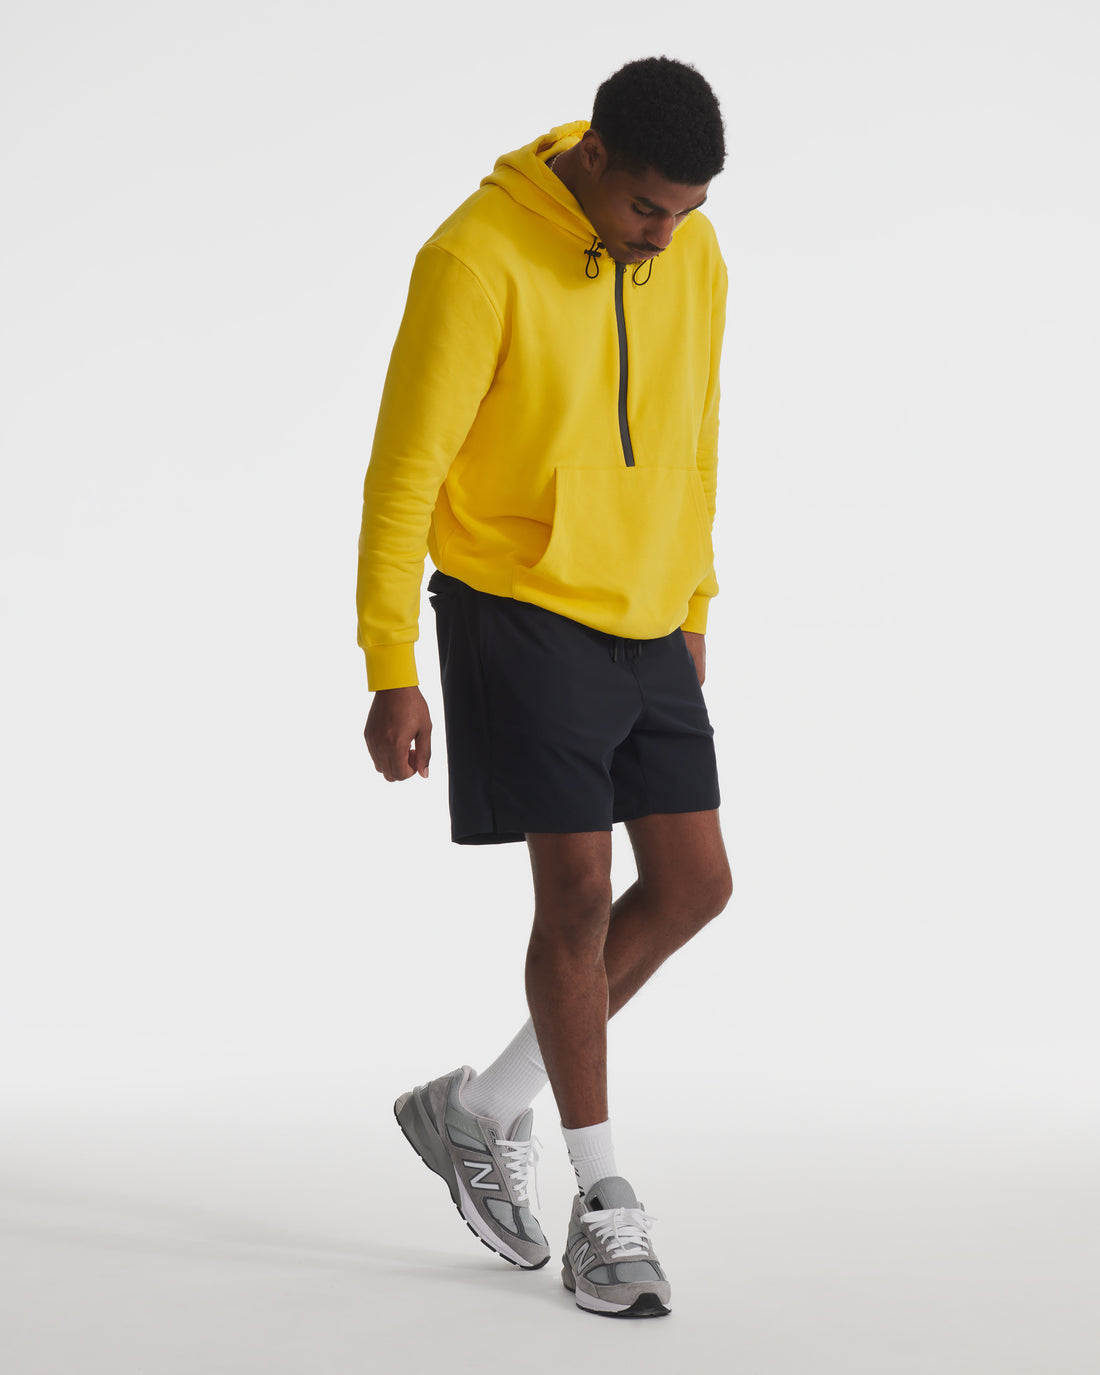 The ADIUM Soleil French Terry Half Zip Hoodie | "The Future of Fitness" Men's Health